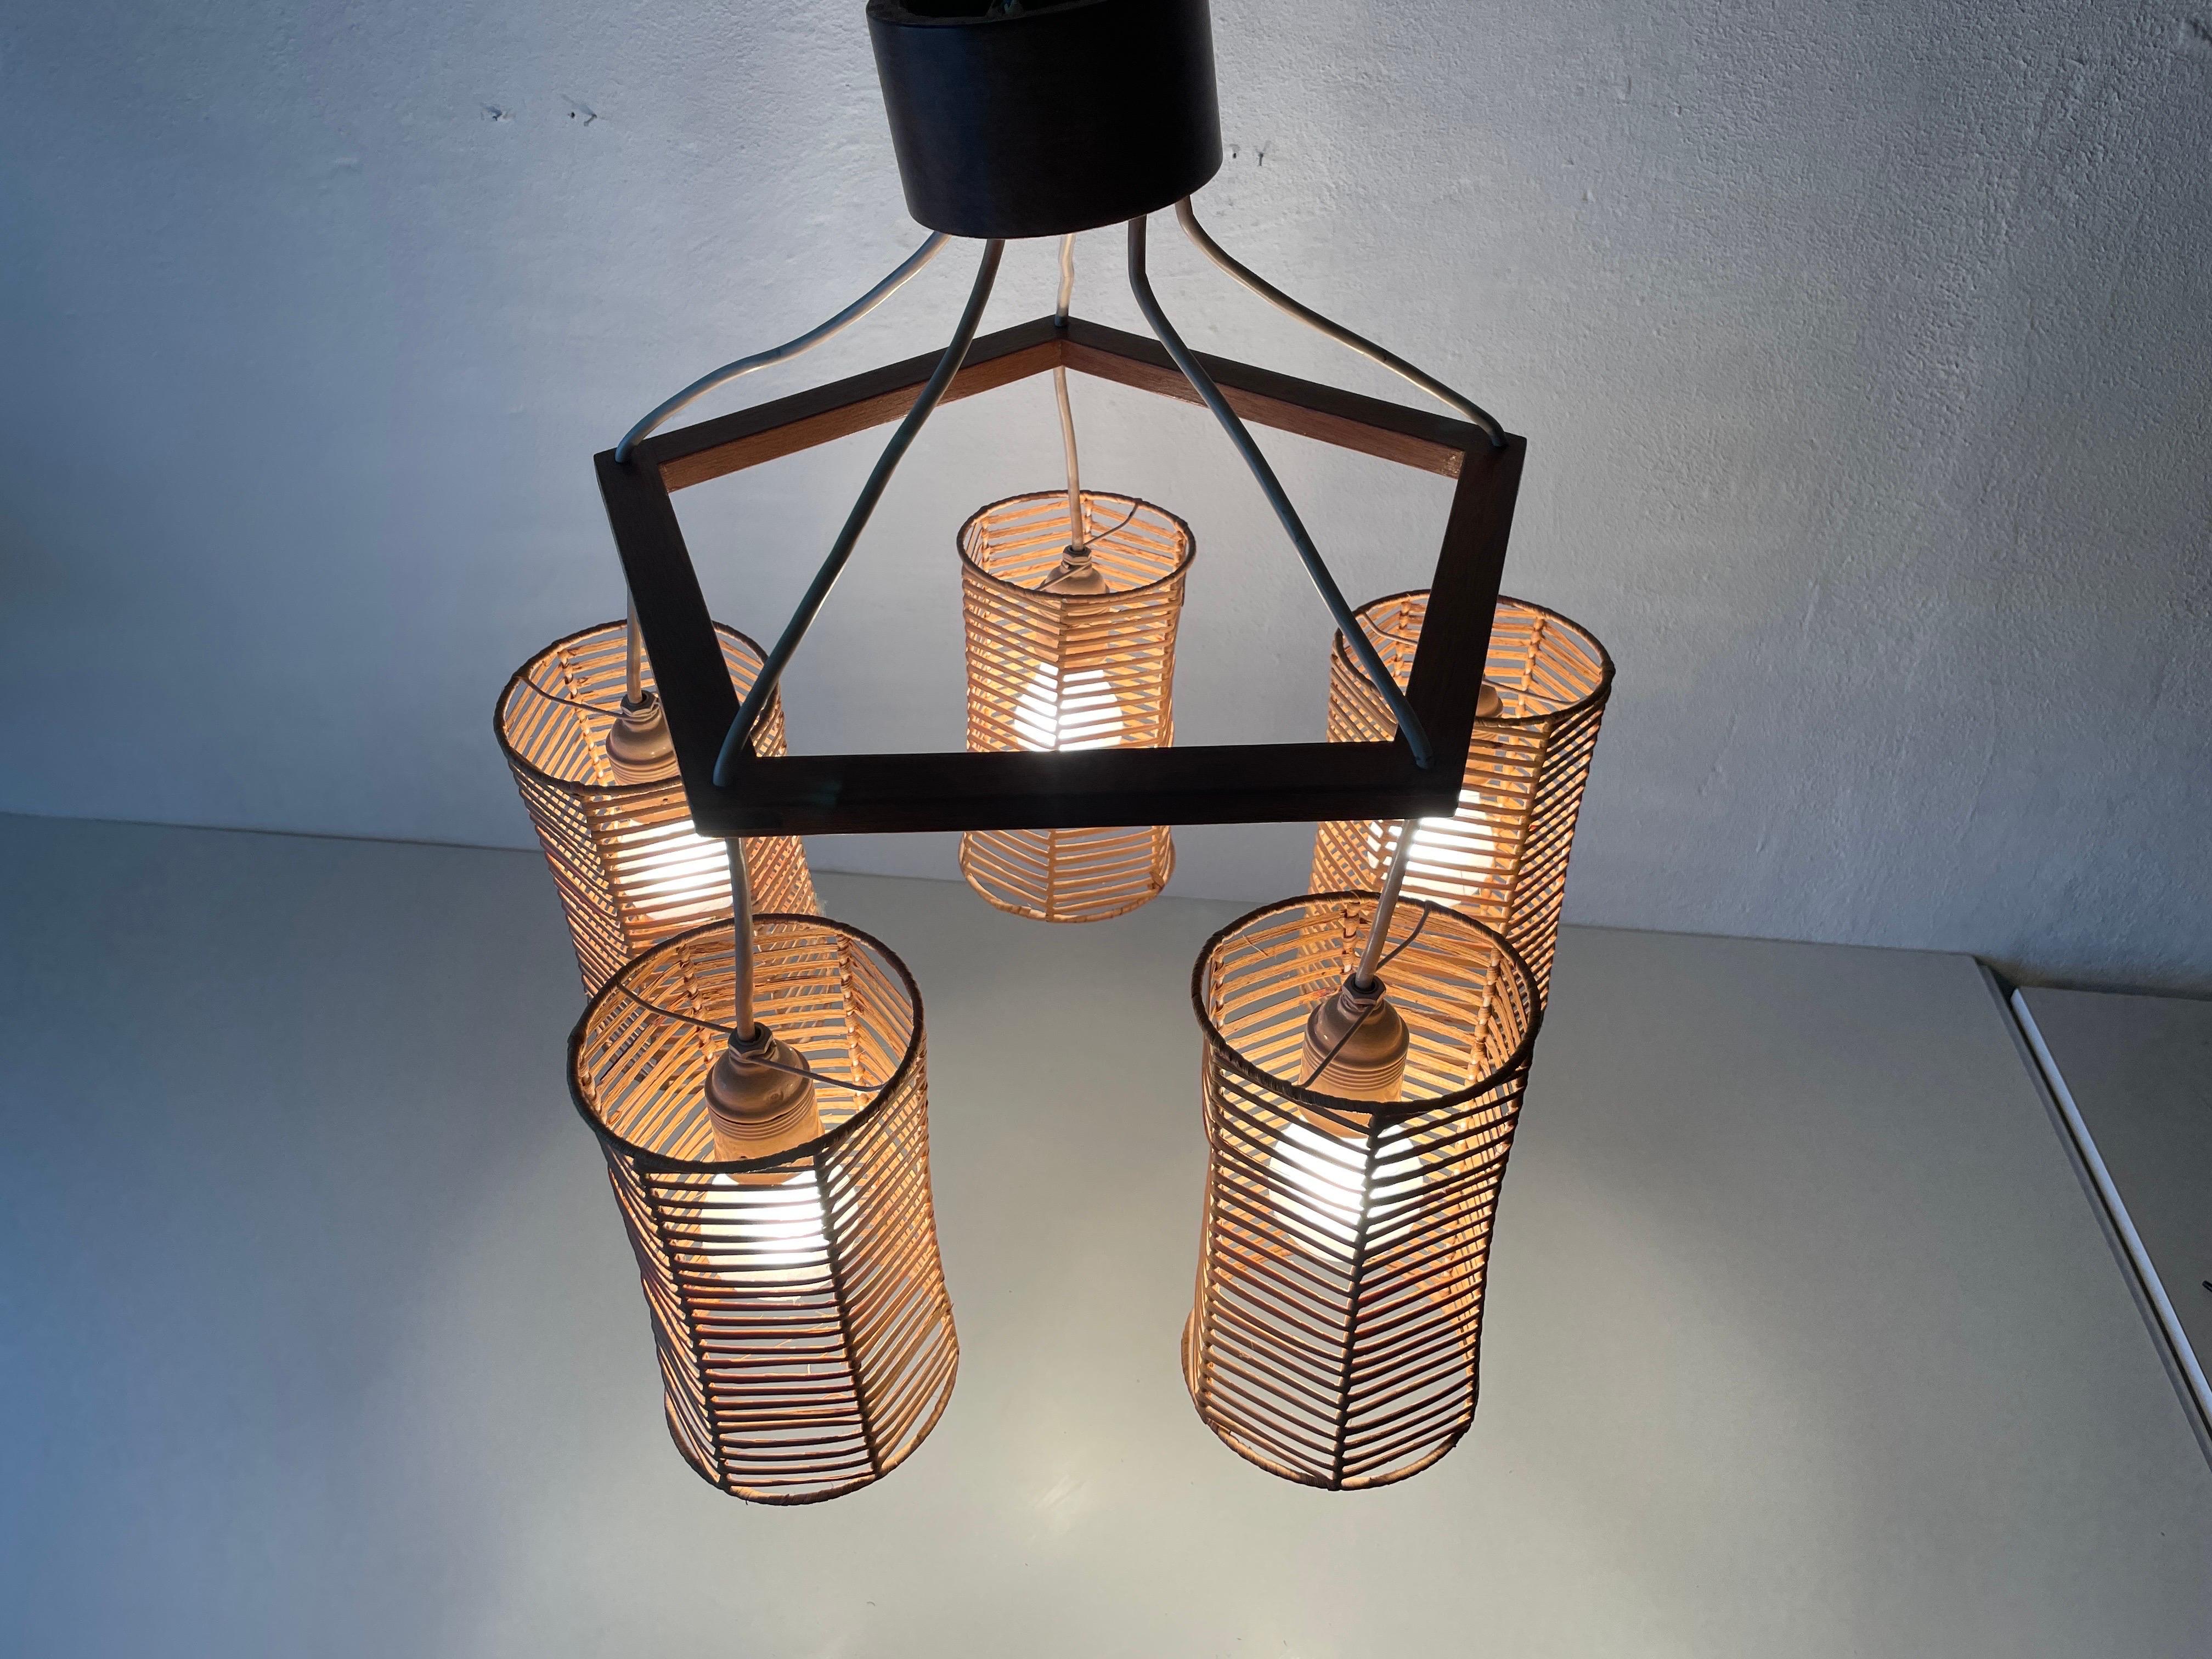 5-head Wicker and Wood Pendant Lamp, 1960s, Germany For Sale 6